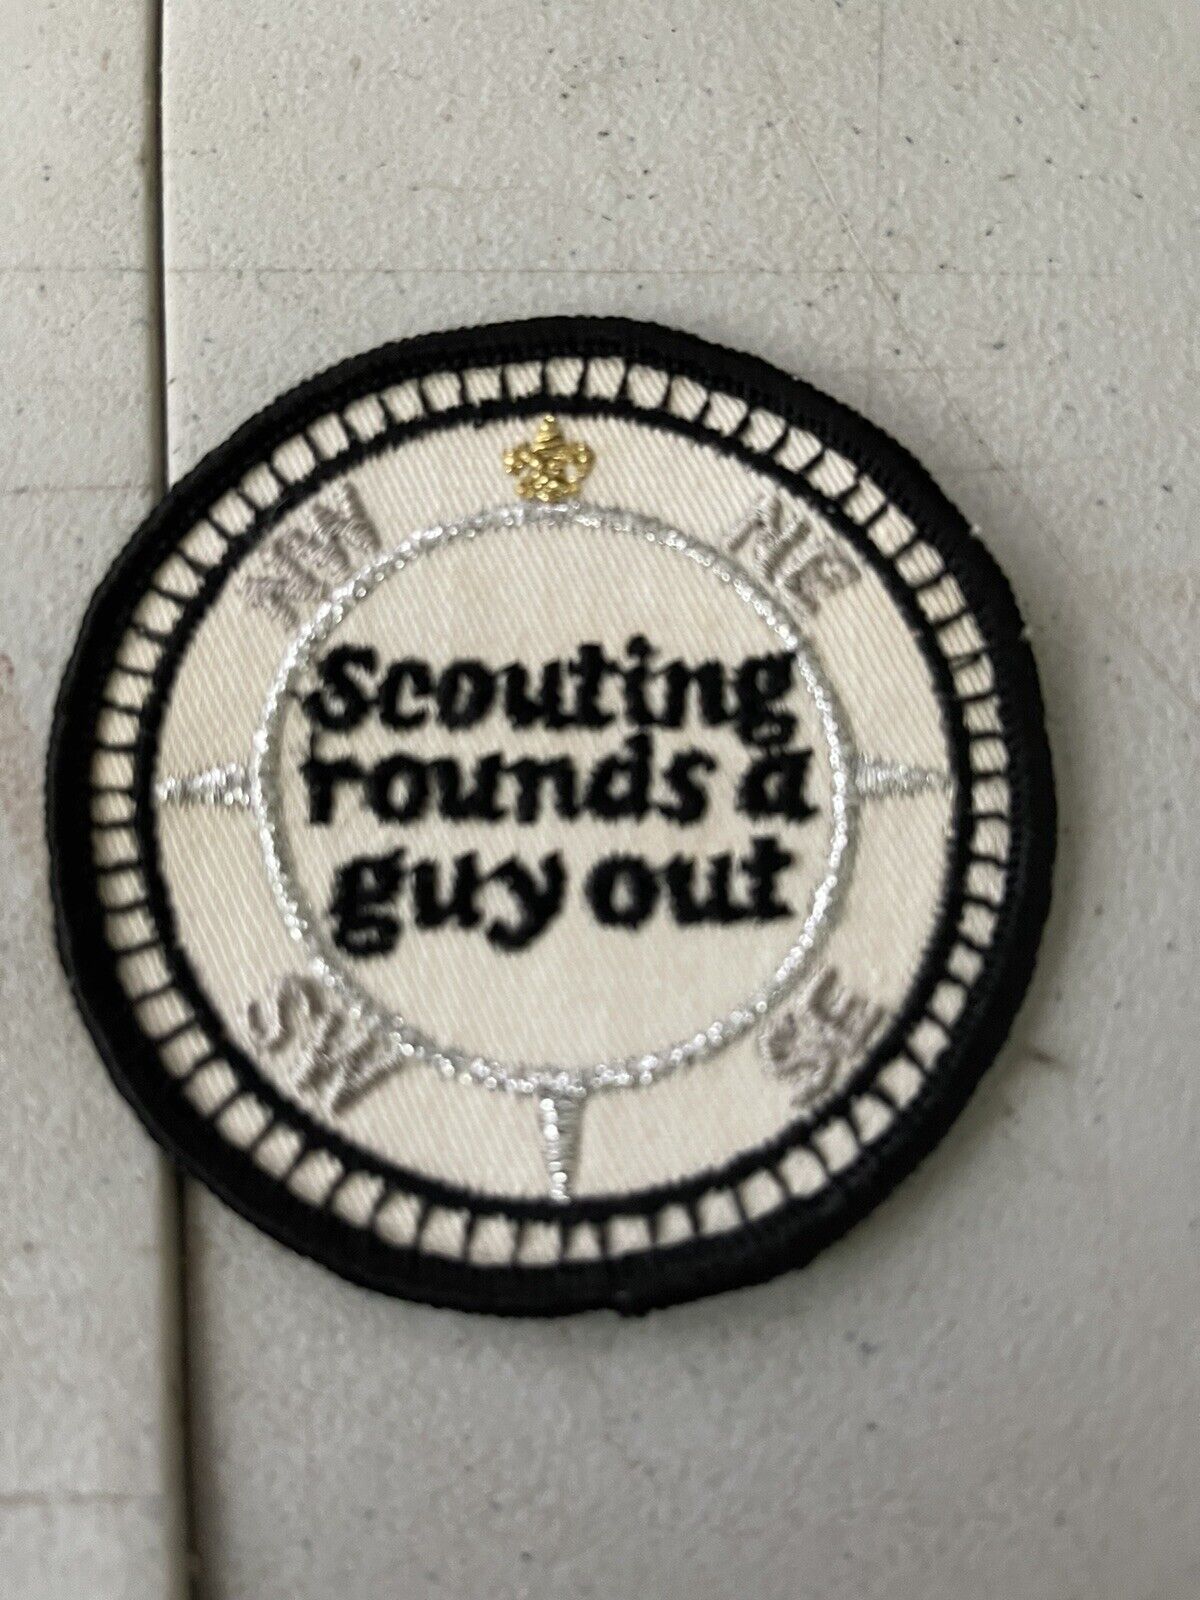 Used 1960\'s Scouting Rounds a Guy Out Boy Scout BSA Round Patch Compass Design